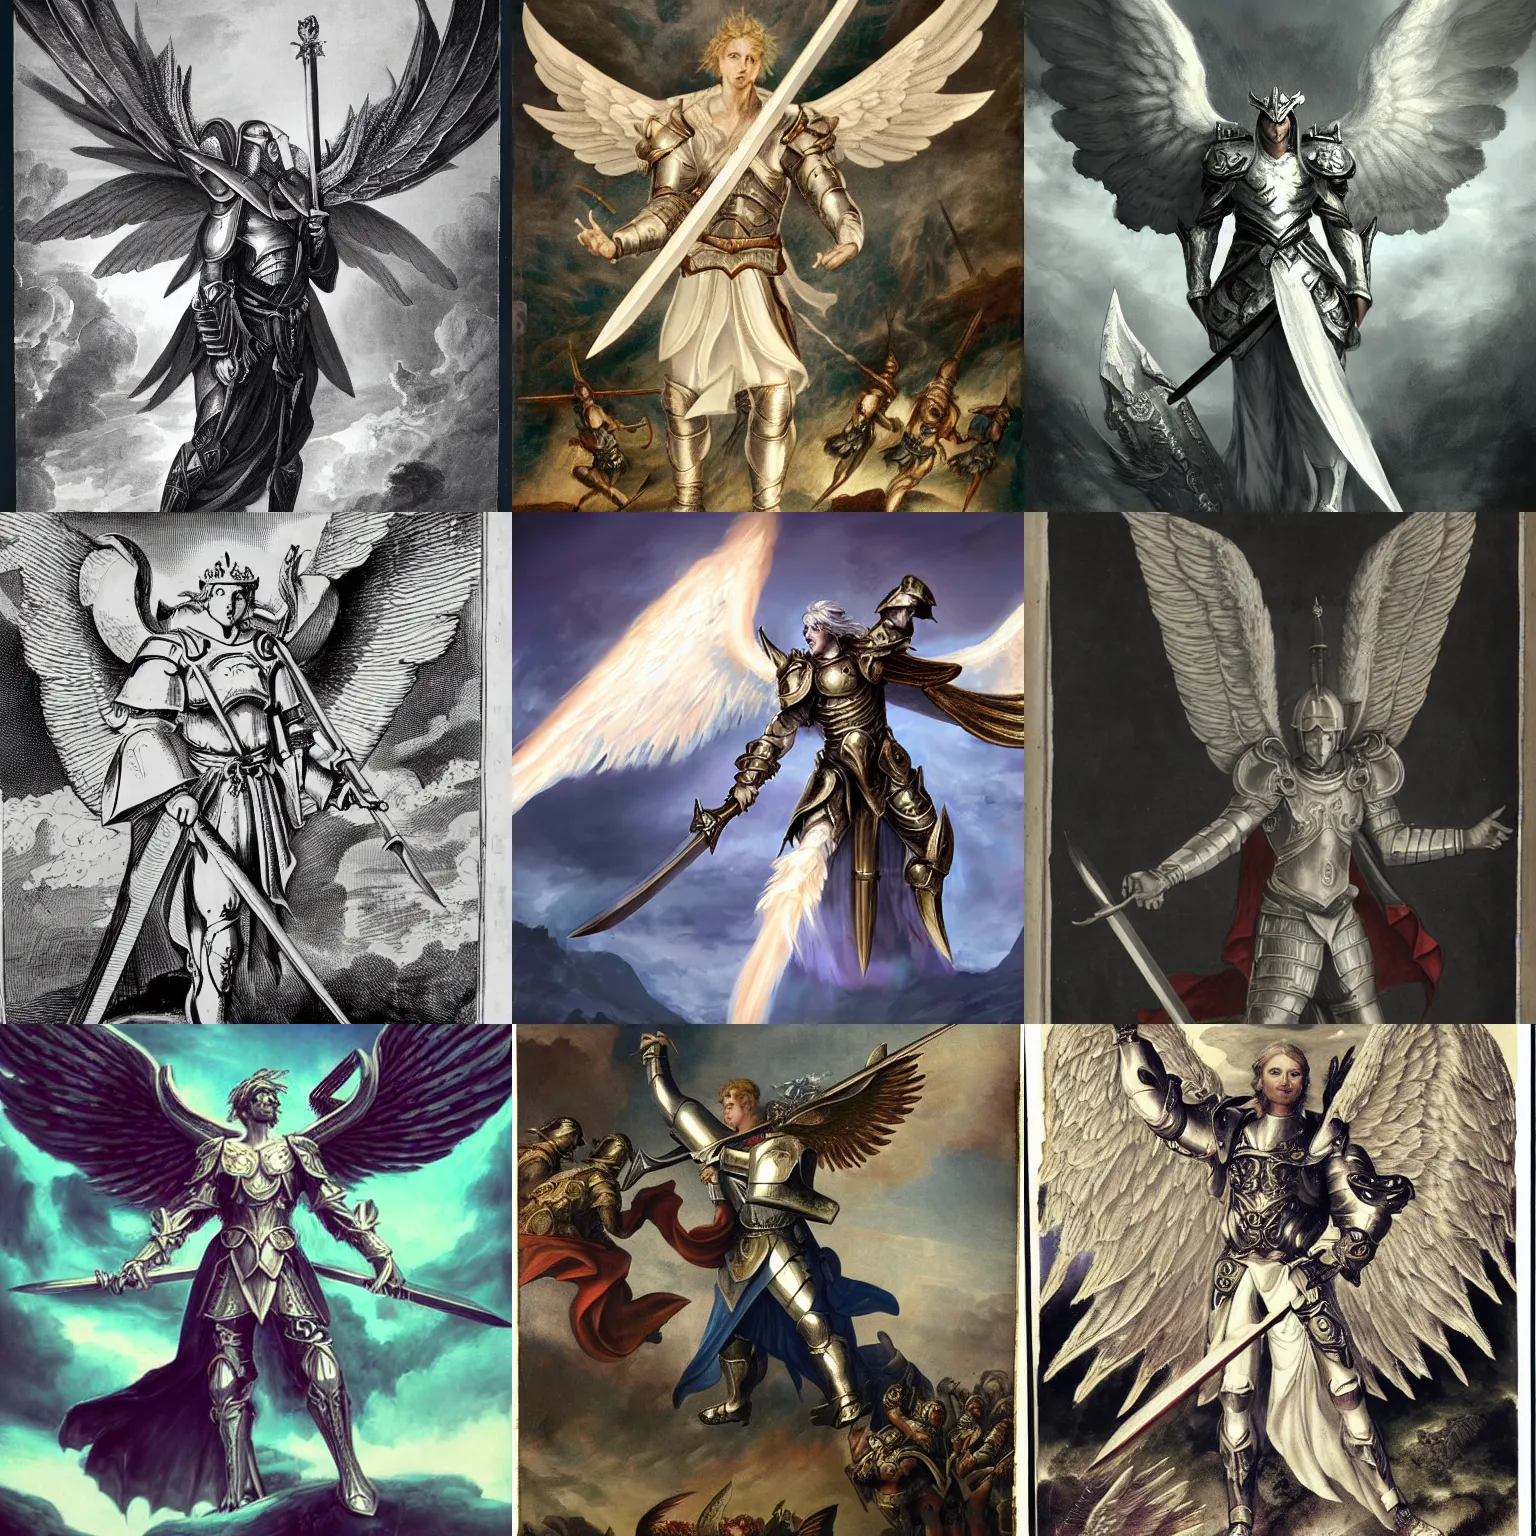 Prompt: male angel warrior in plate armor with big white wings, wielding a sword, descending from the sky prepared to battle, flanked by an army of demons